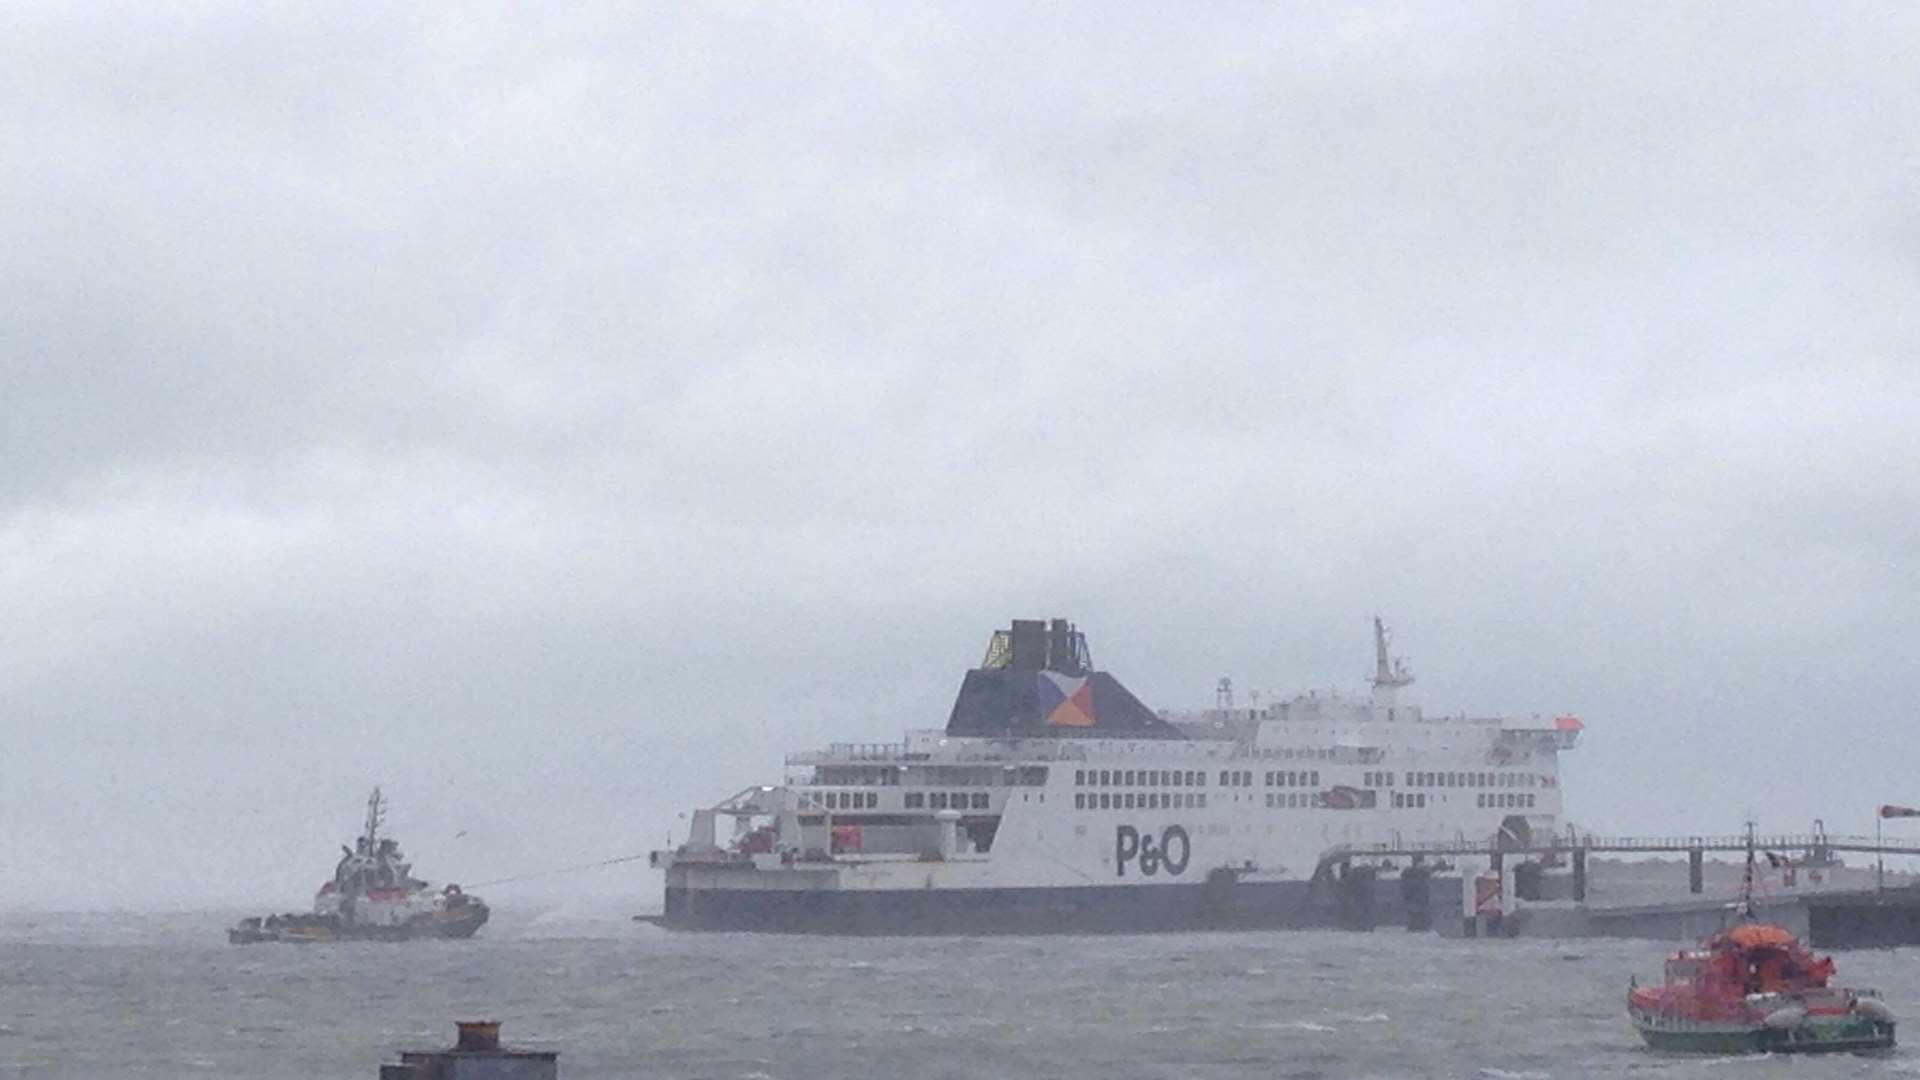 A P&O ferry bound for Dover has run aground in bad weather near the Port of Calais. Pic: Dean Carguillo